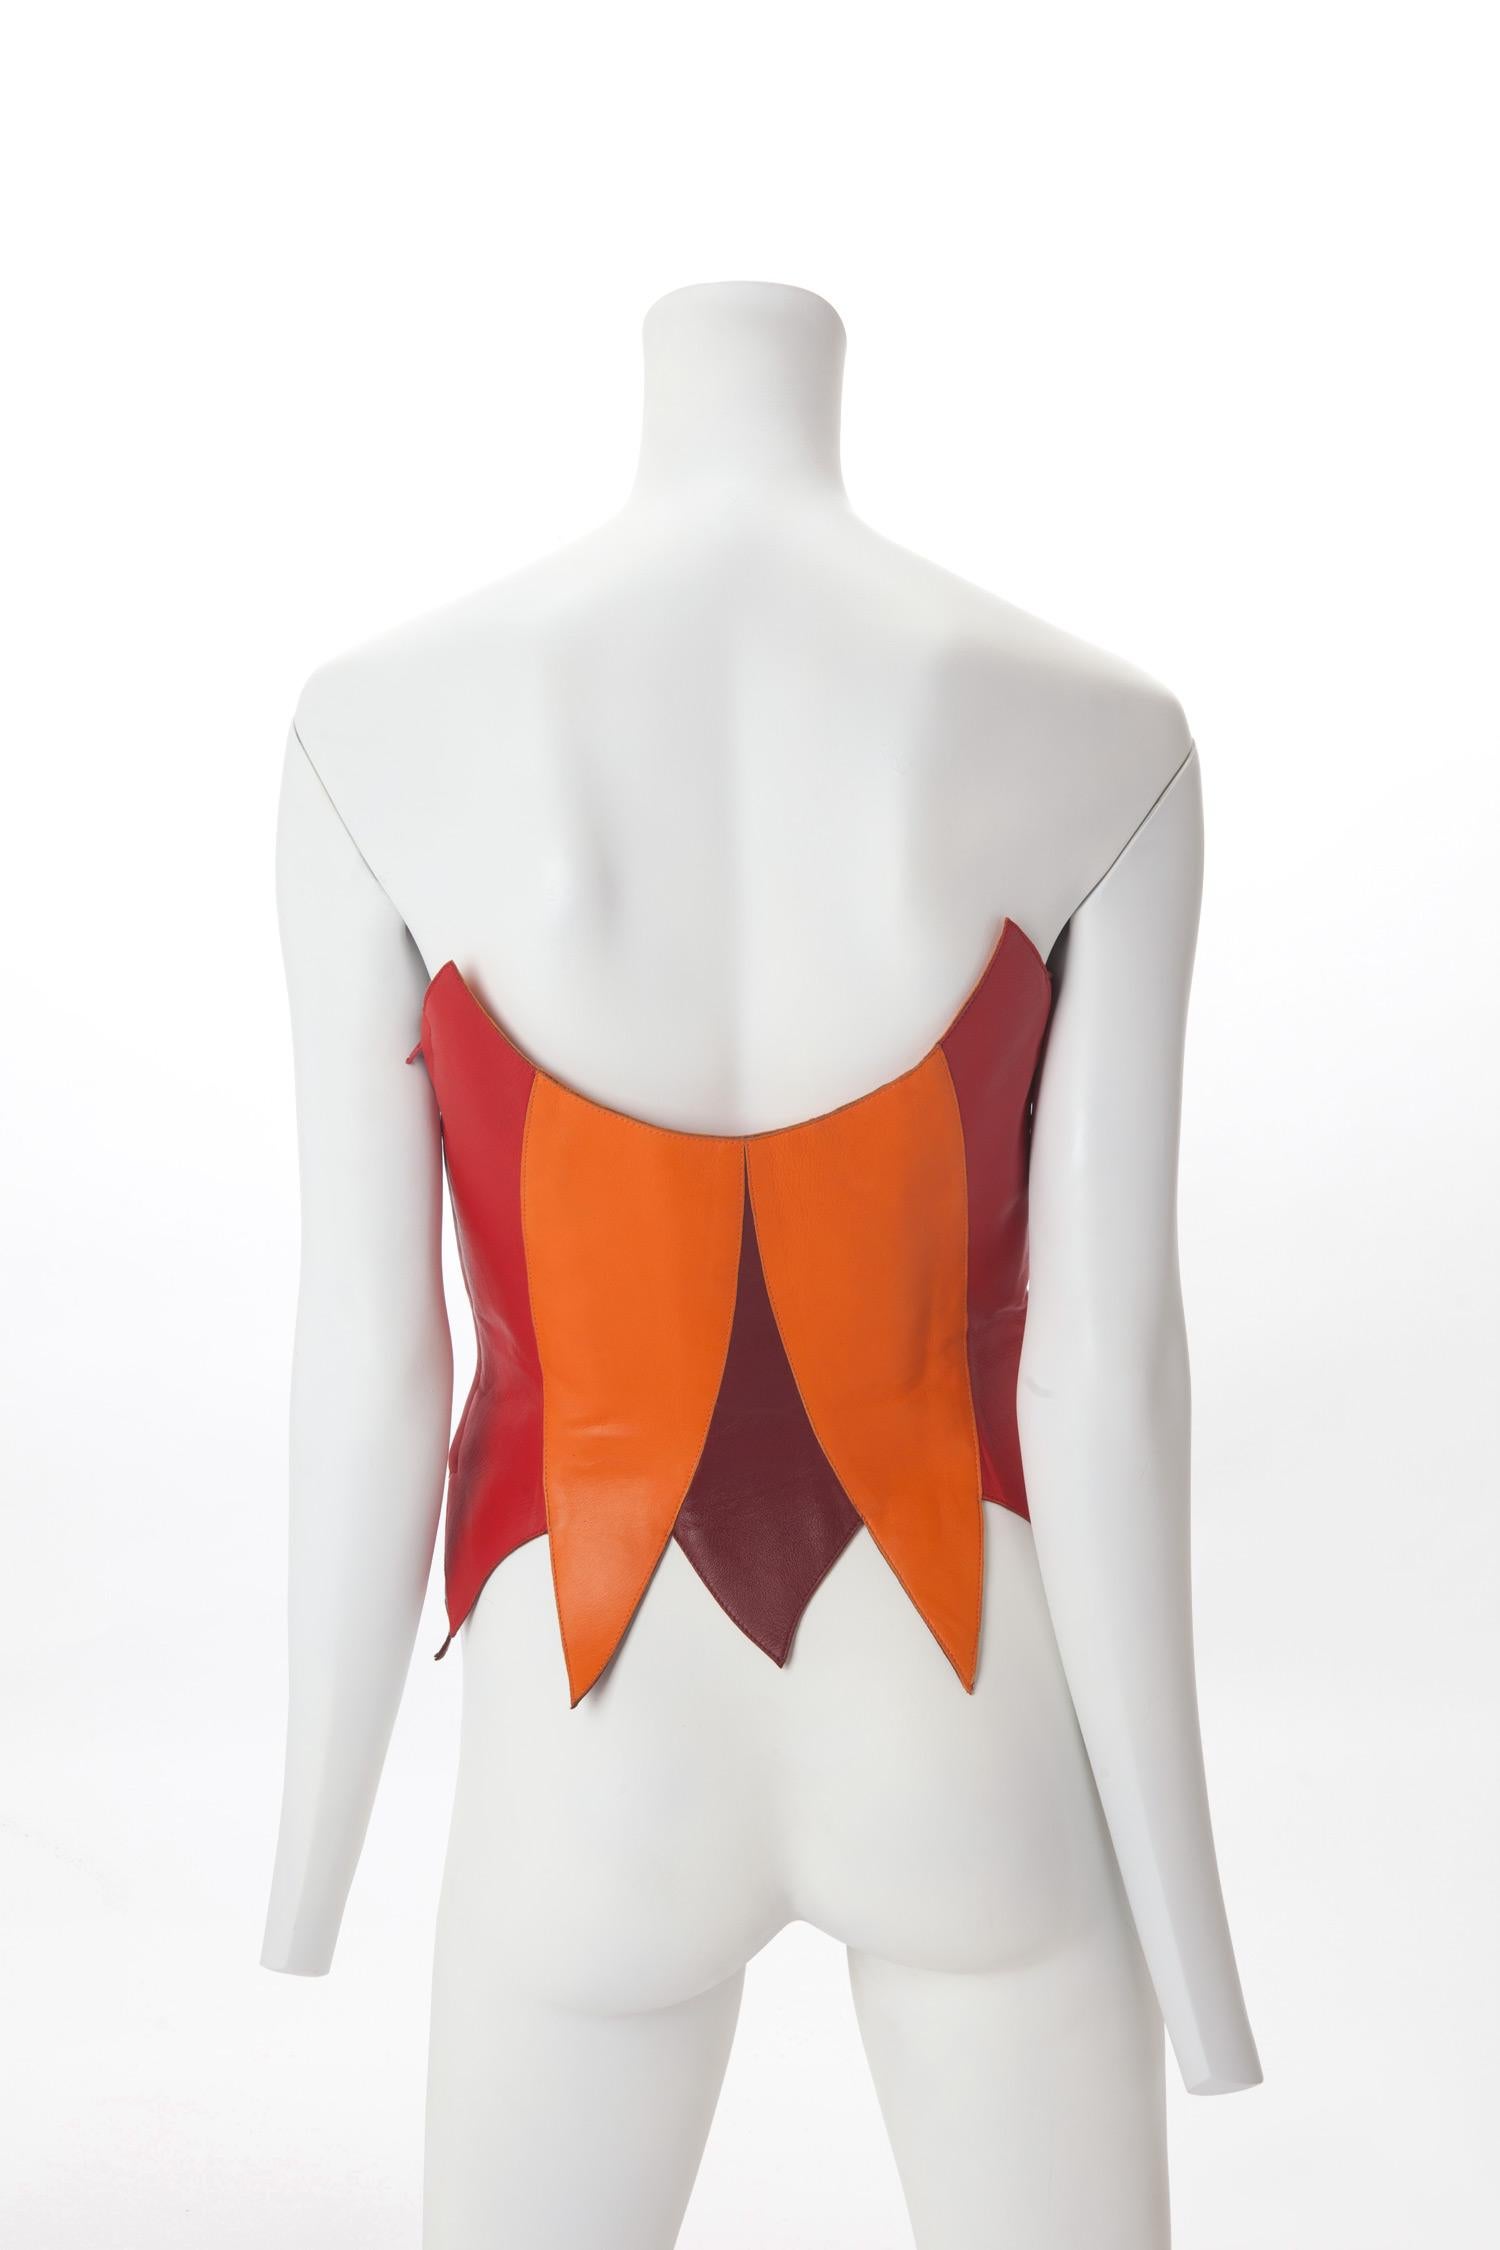 c. 1989-92 Thierry Mugler Couture Leather Flame Bustier Museum In Good Condition In New York, NY